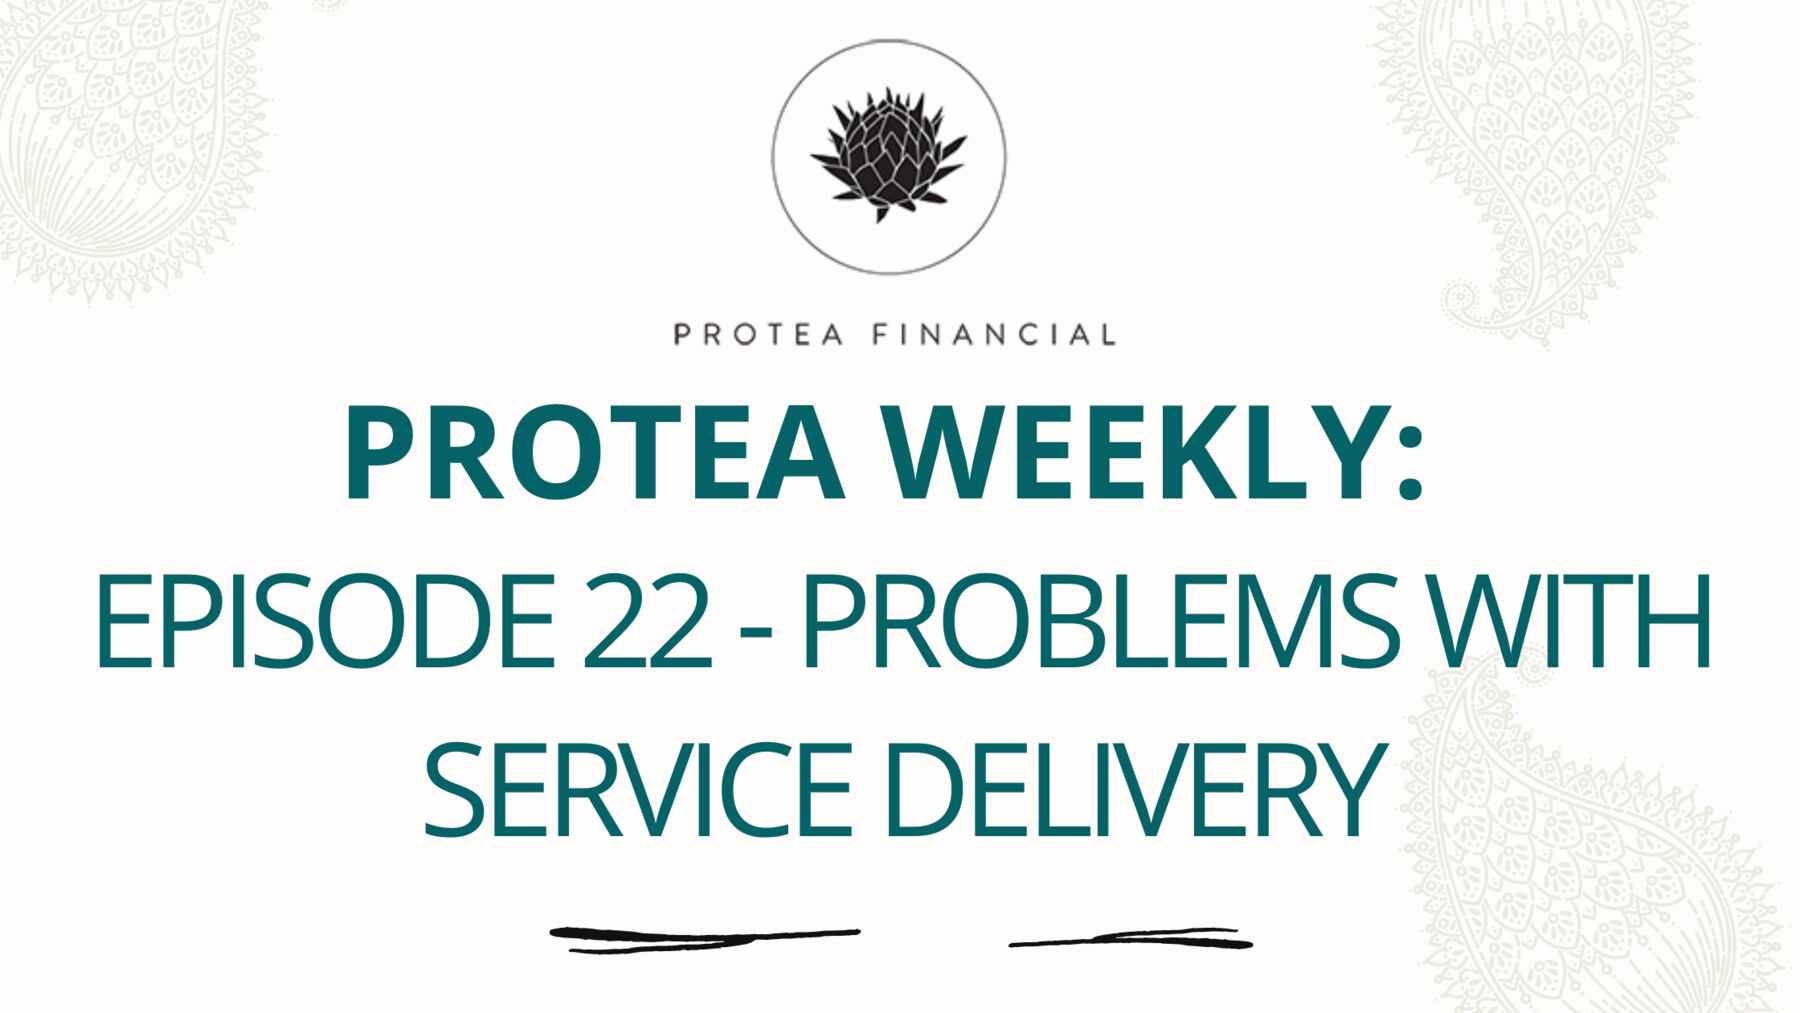 Protea Weekly - Episode 22 - Problems with service deliverys